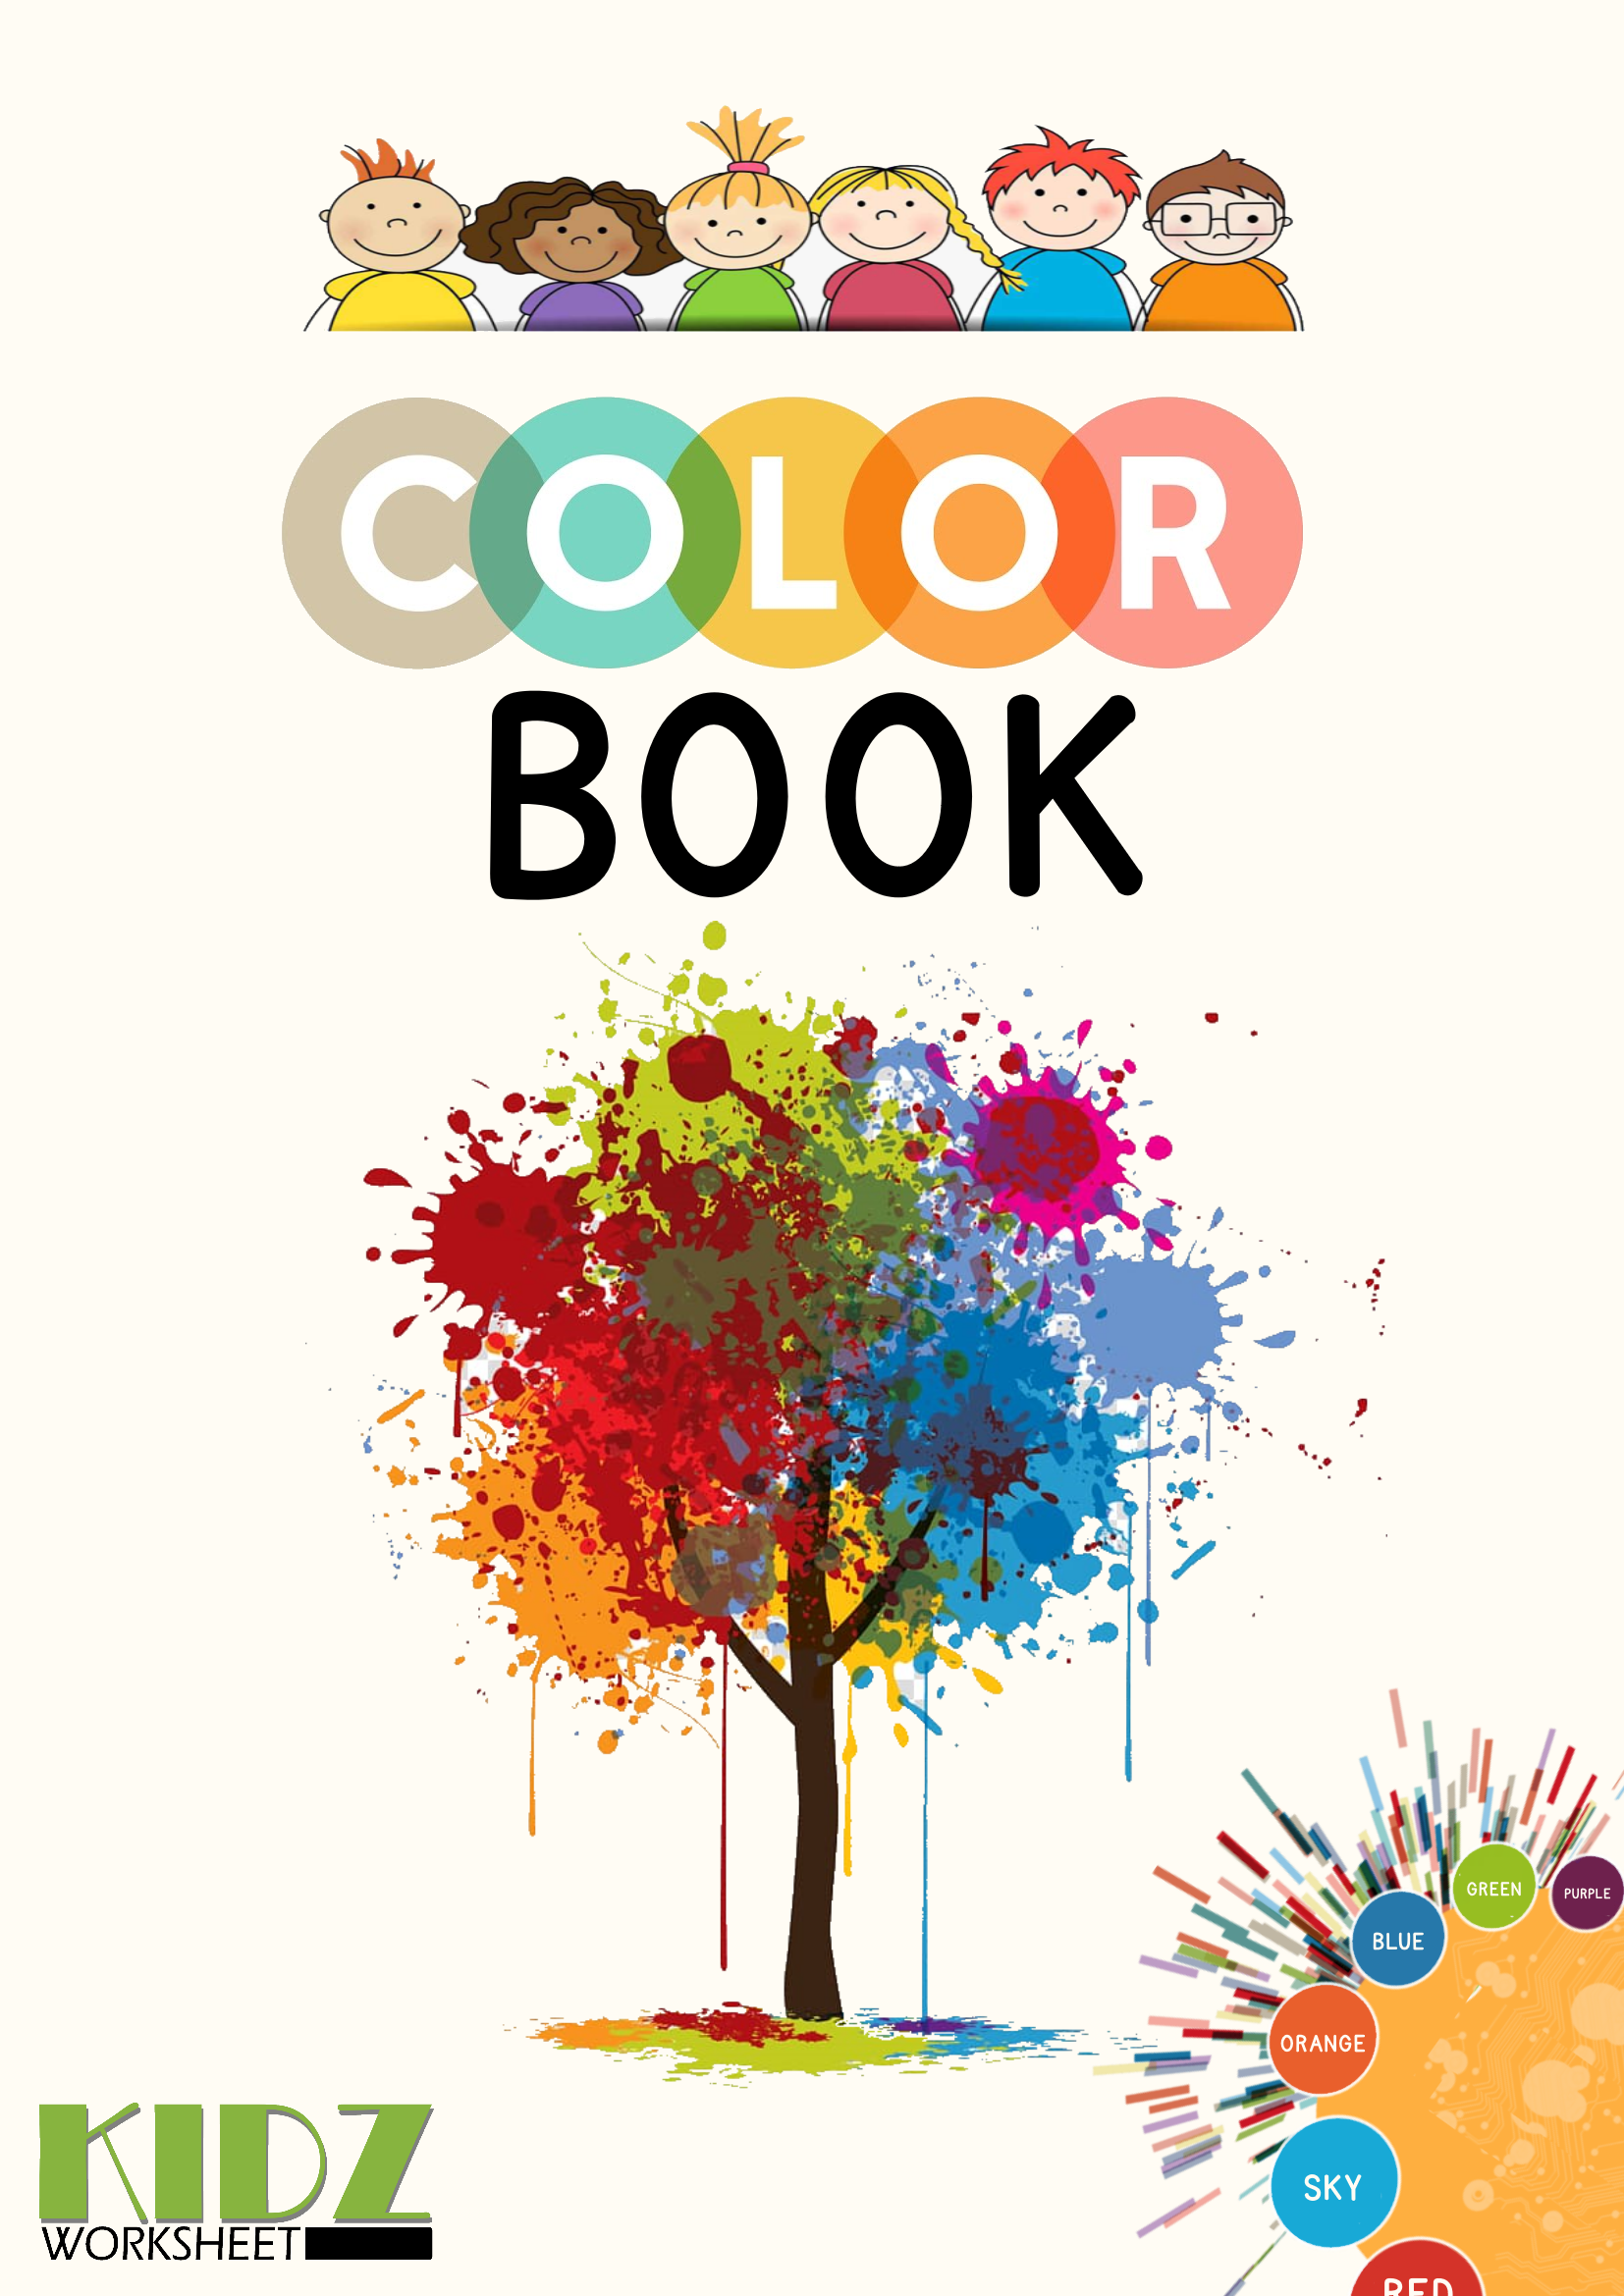 Color Book, for kindergarteners and grade 1